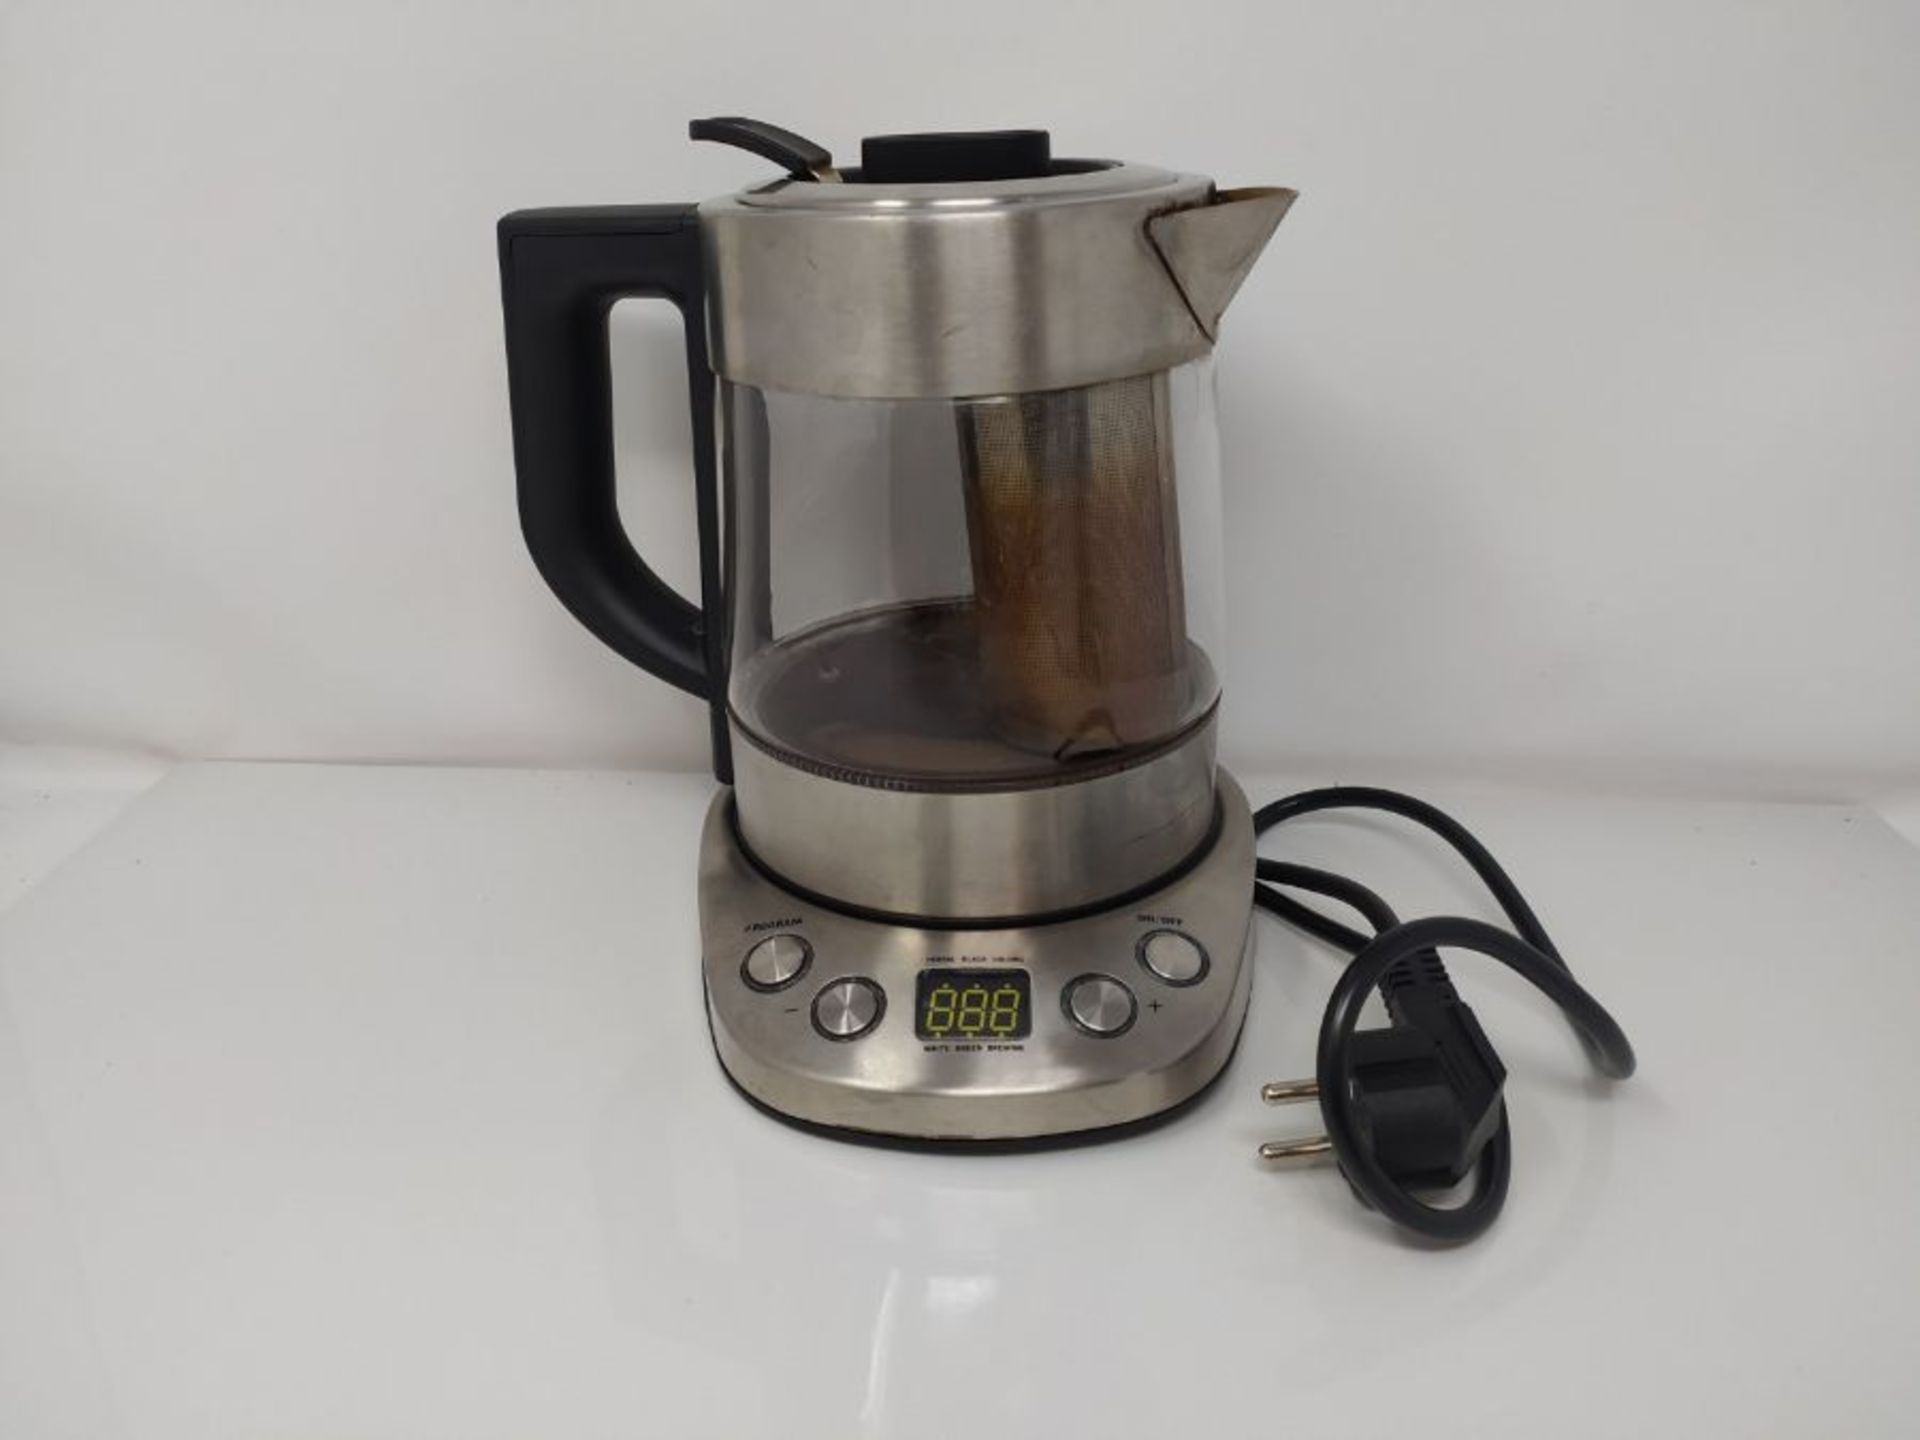 RRP £52.00 Severin Deluxe Mini Kettle for Cooking Water and Tea with 2000 W of Power WK 3473, Gla - Image 3 of 3